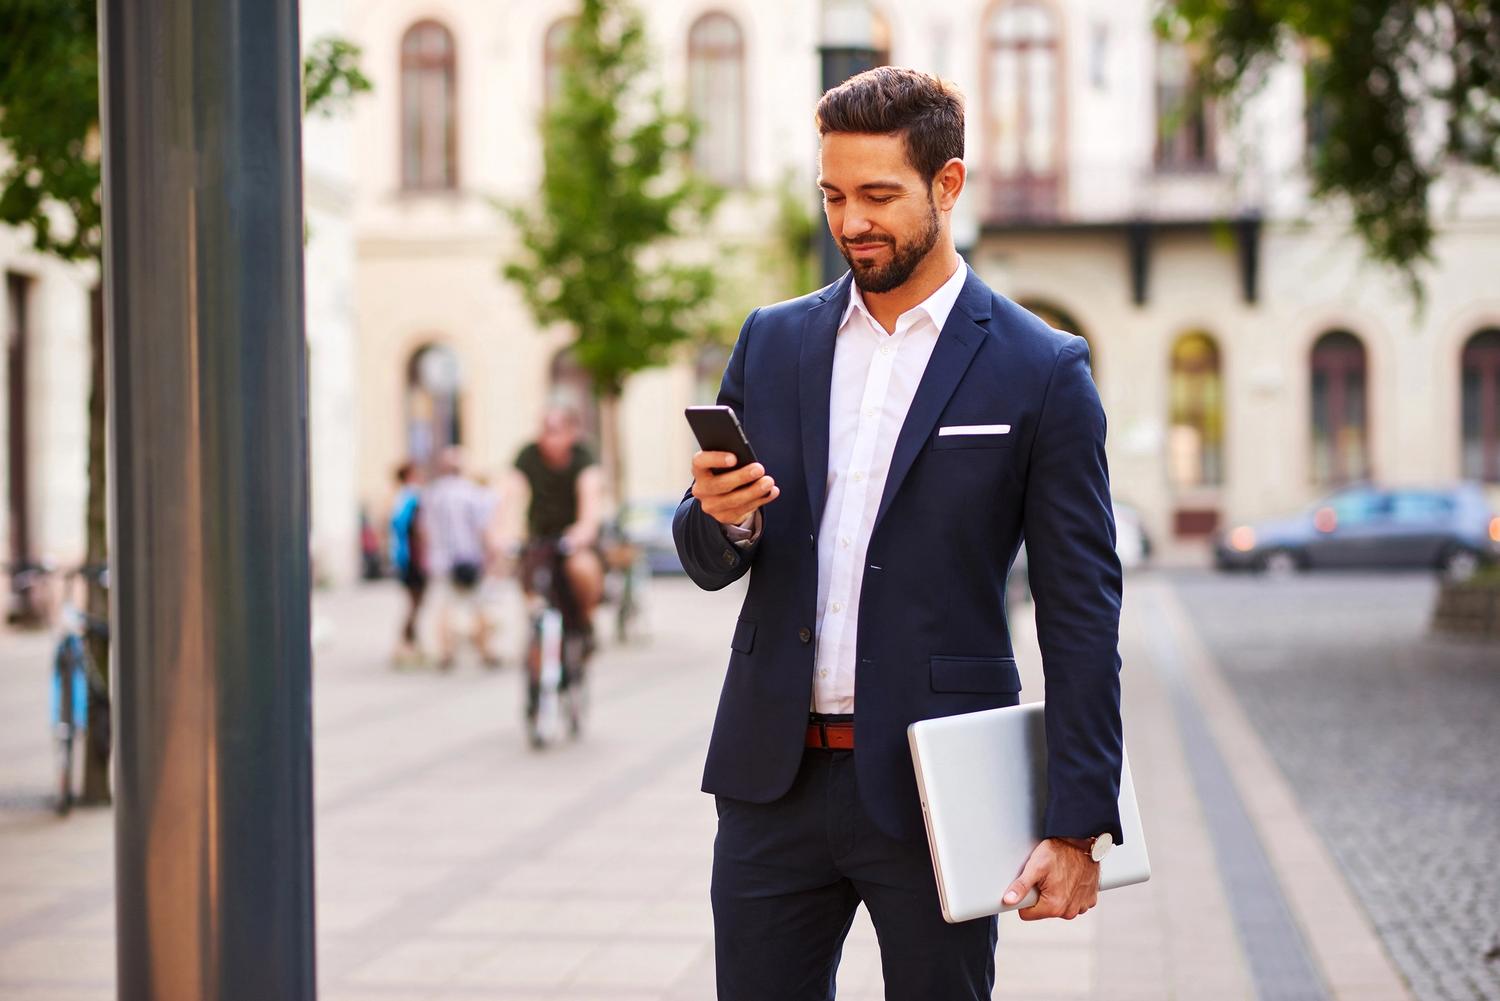 Man in a suit looking at his phone